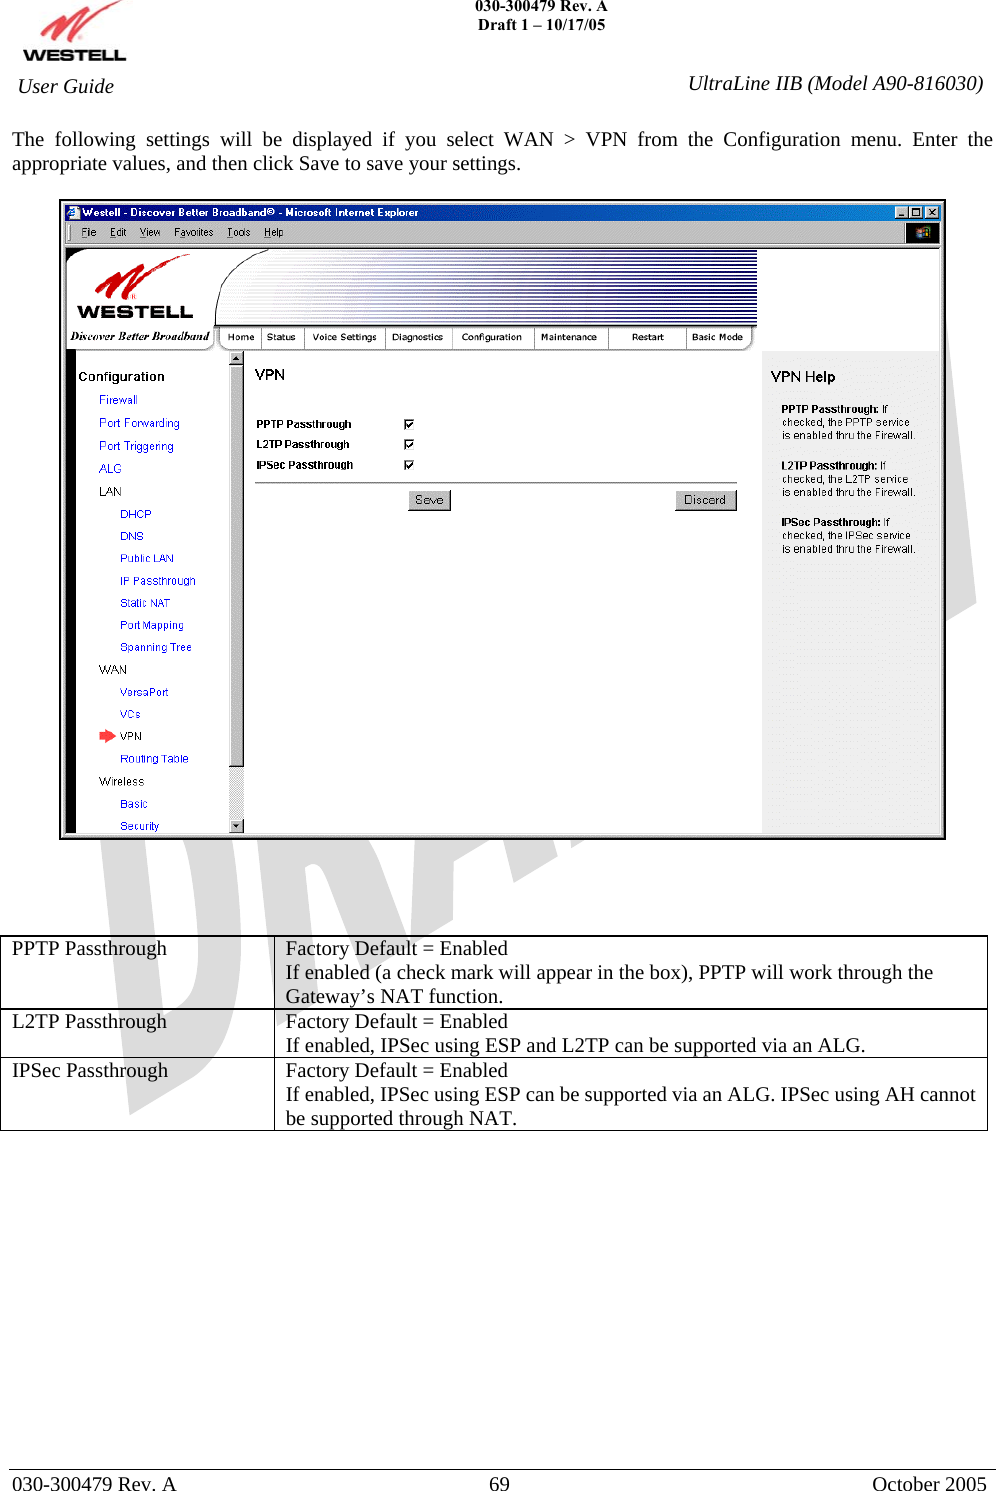    030-300479 Rev. A Draft 1 – 10/17/05   030-300479 Rev. A  69  October 2005  User Guide  UltraLine IIB (Model A90-816030)The following settings will be displayed if you select WAN &gt; VPN from the Configuration menu. Enter the appropriate values, and then click Save to save your settings.       PPTP Passthrough  Factory Default = Enabled If enabled (a check mark will appear in the box), PPTP will work through the Gateway’s NAT function. L2TP Passthrough  Factory Default = Enabled If enabled, IPSec using ESP and L2TP can be supported via an ALG. IPSec Passthrough  Factory Default = Enabled If enabled, IPSec using ESP can be supported via an ALG. IPSec using AH cannot be supported through NAT.              